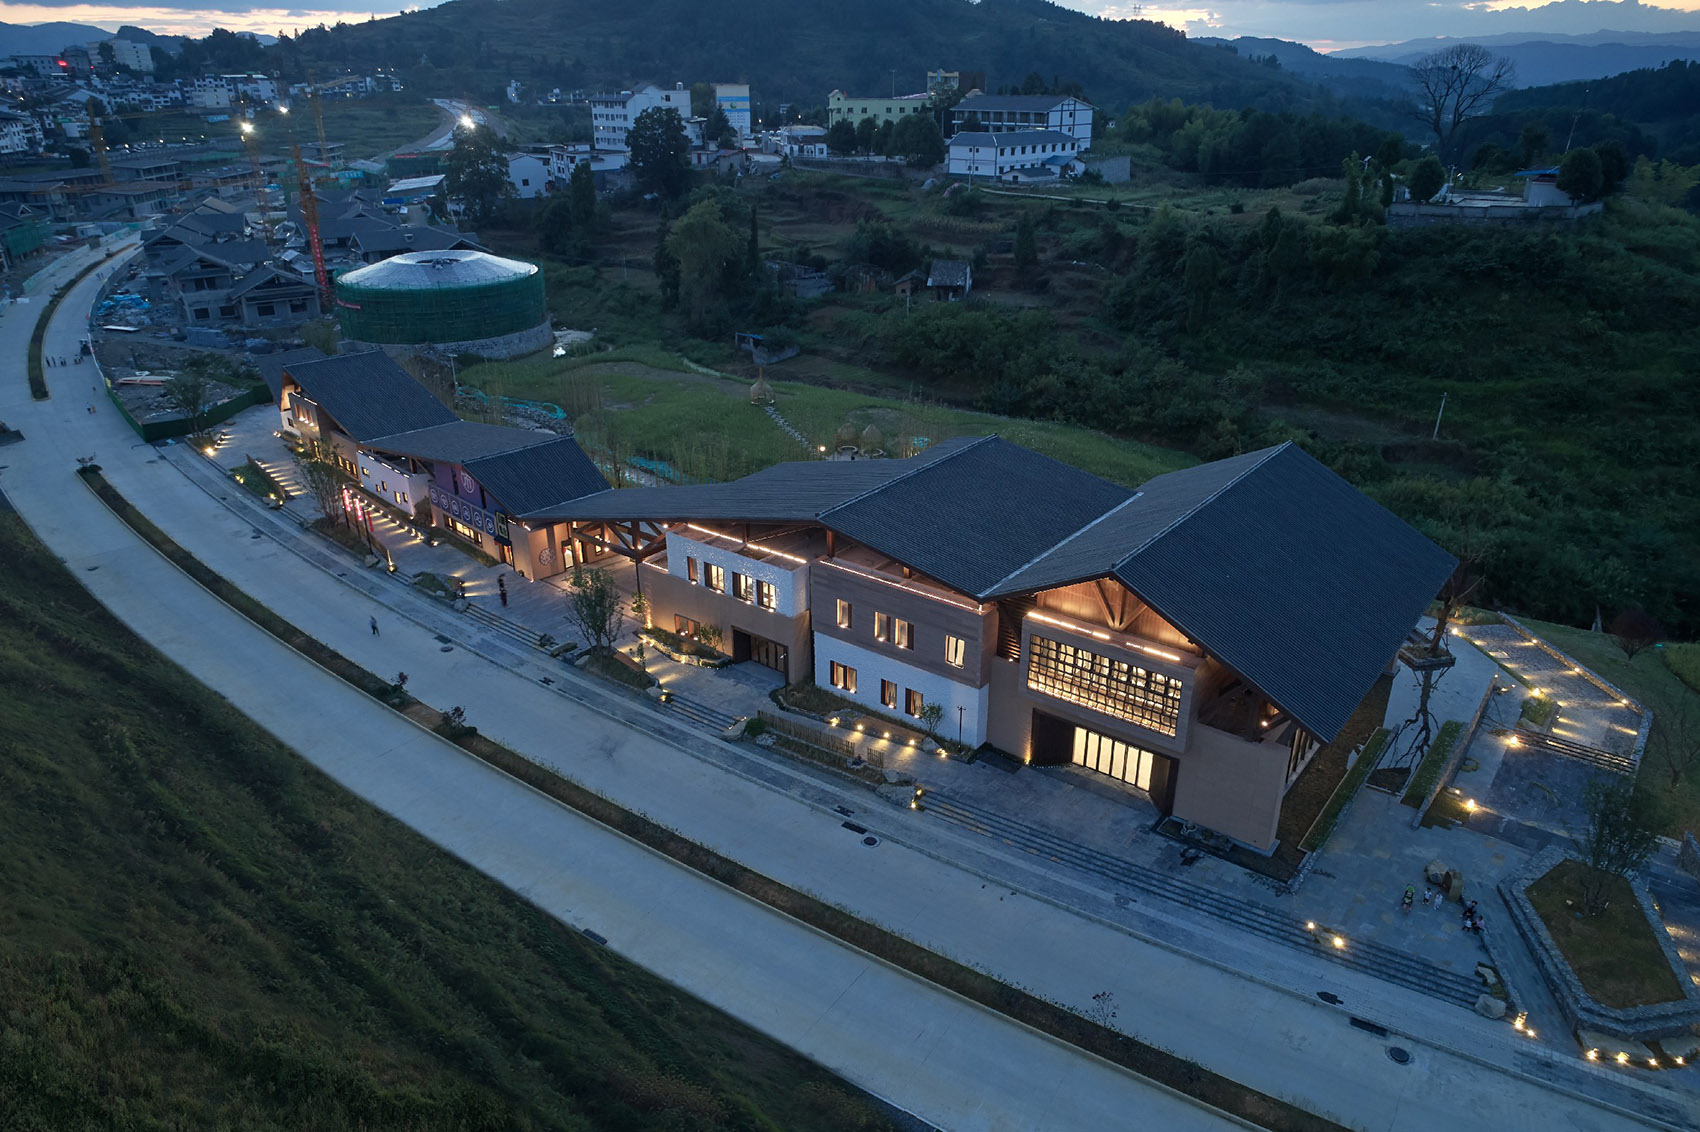 005-guancang-village-centre-china-by-urban-architecture.jpg